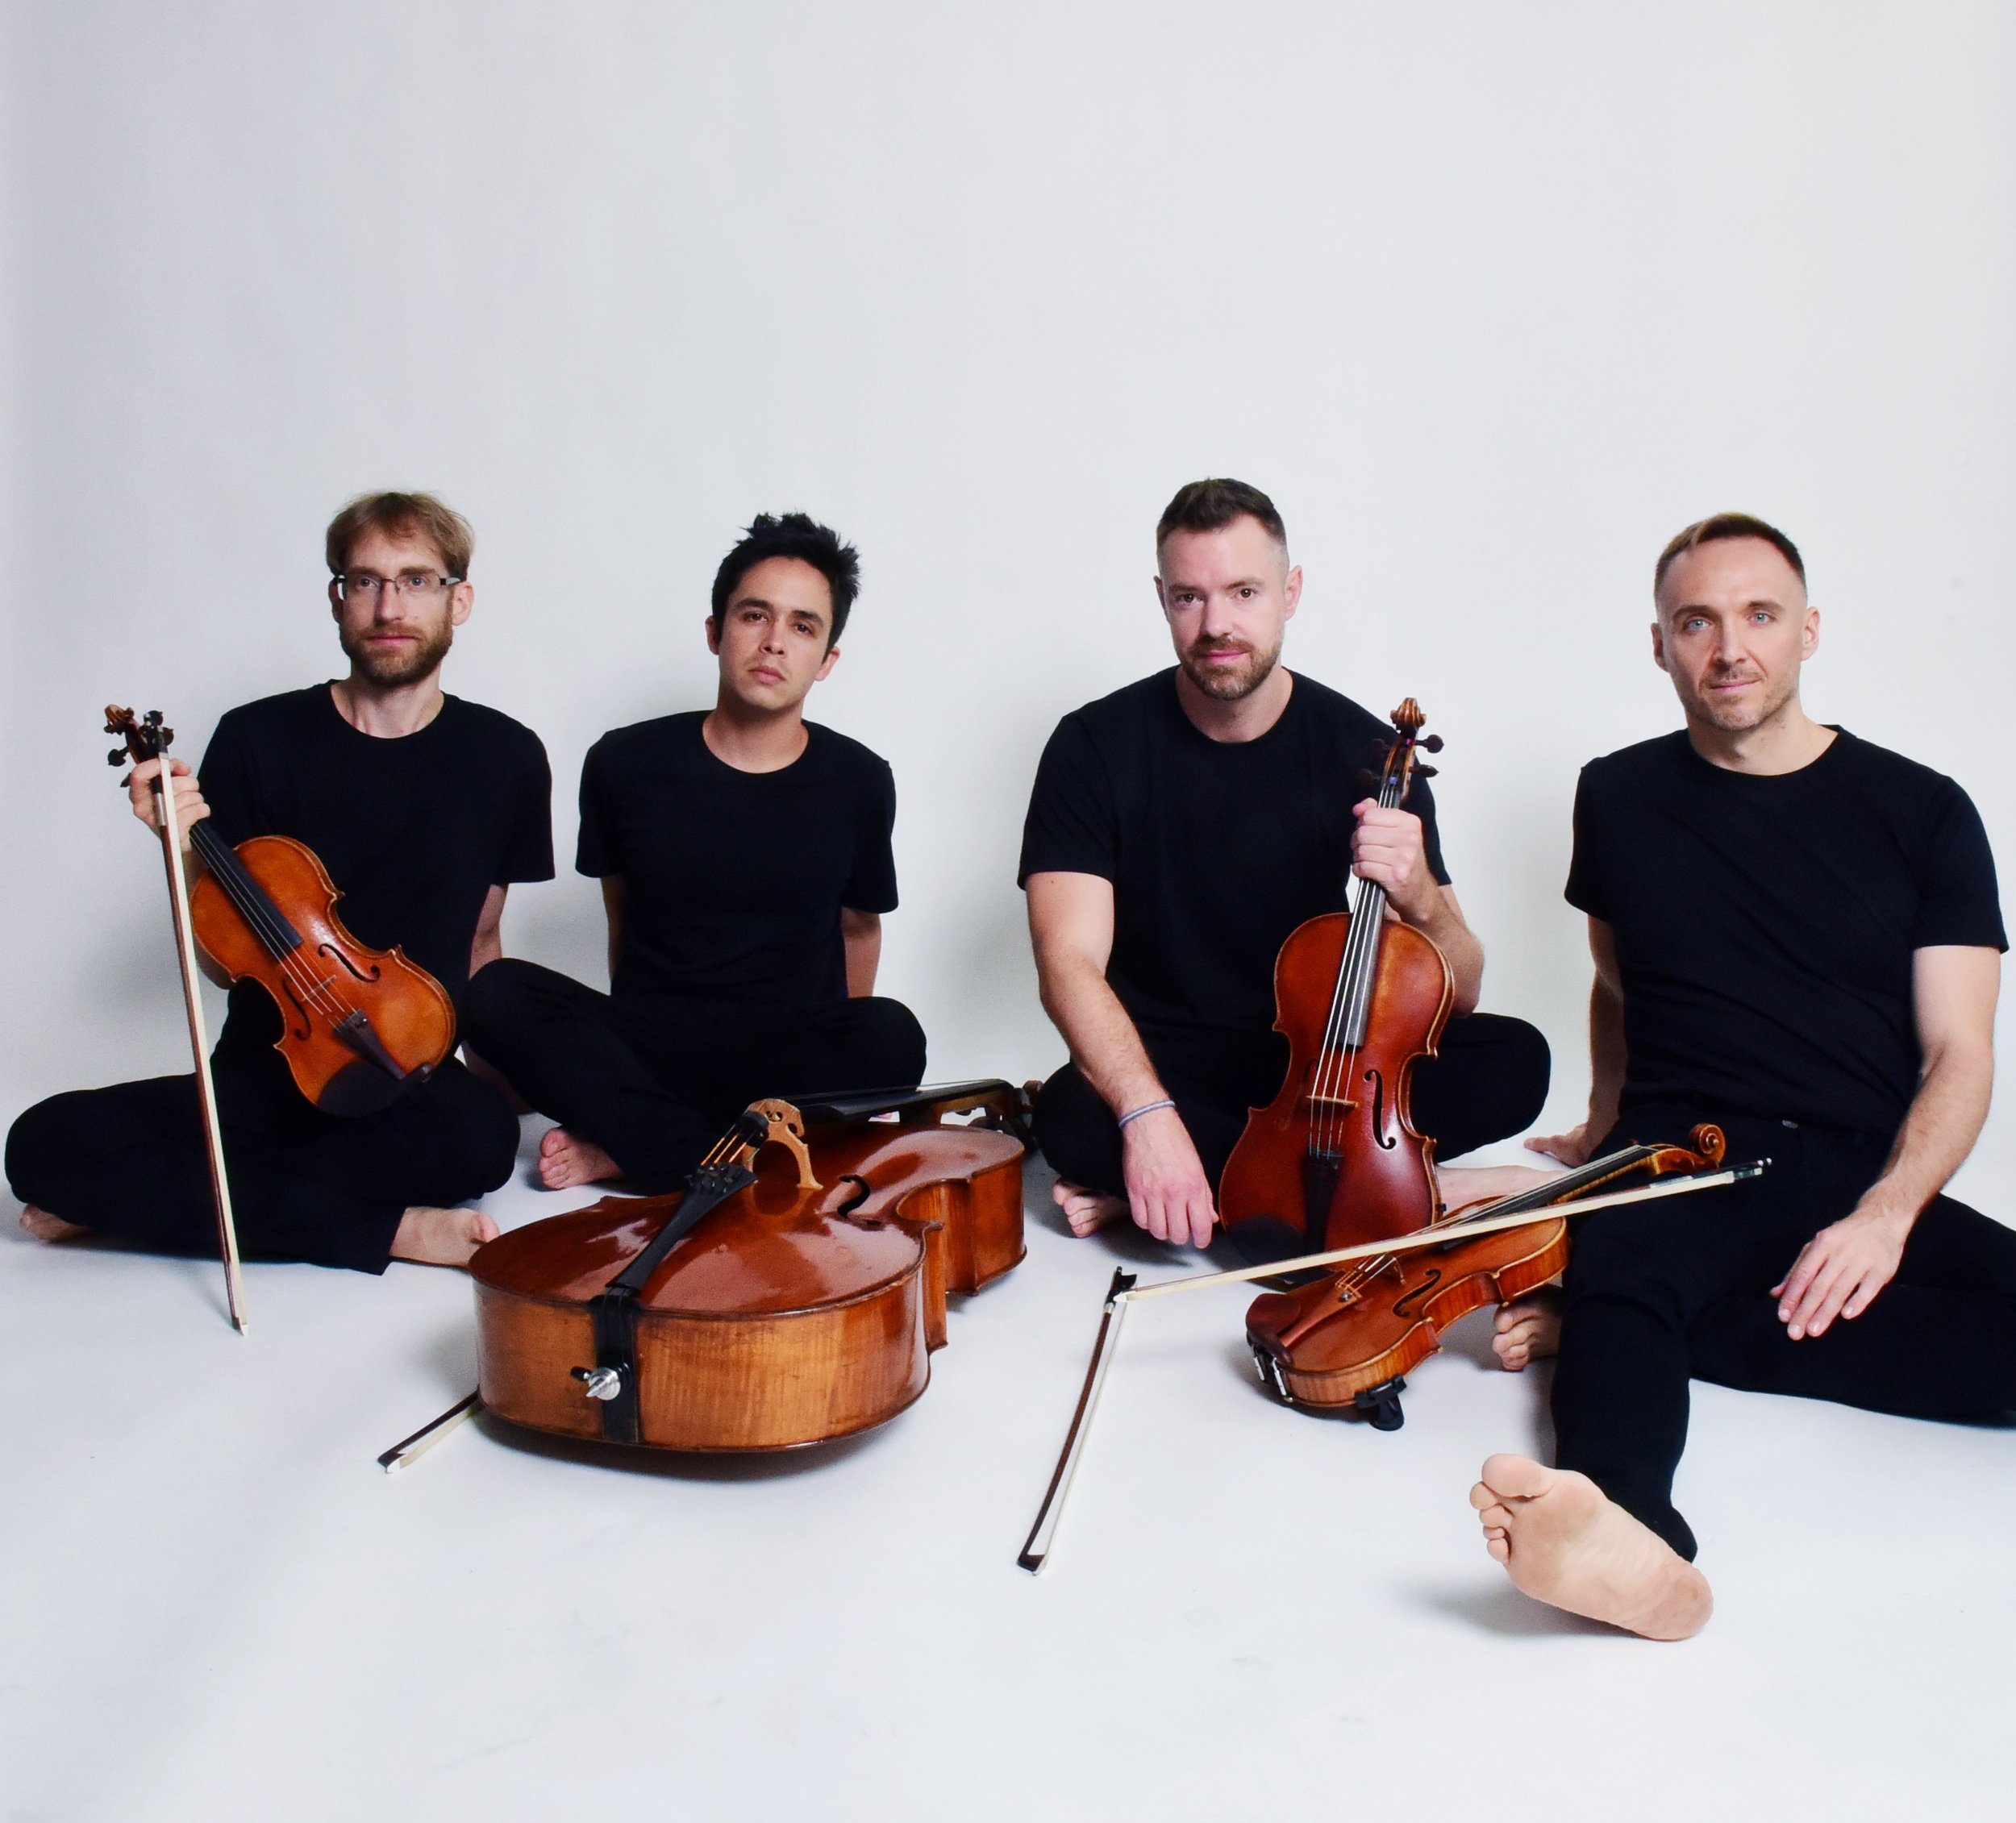 A group of string musicians sitting down near a white background